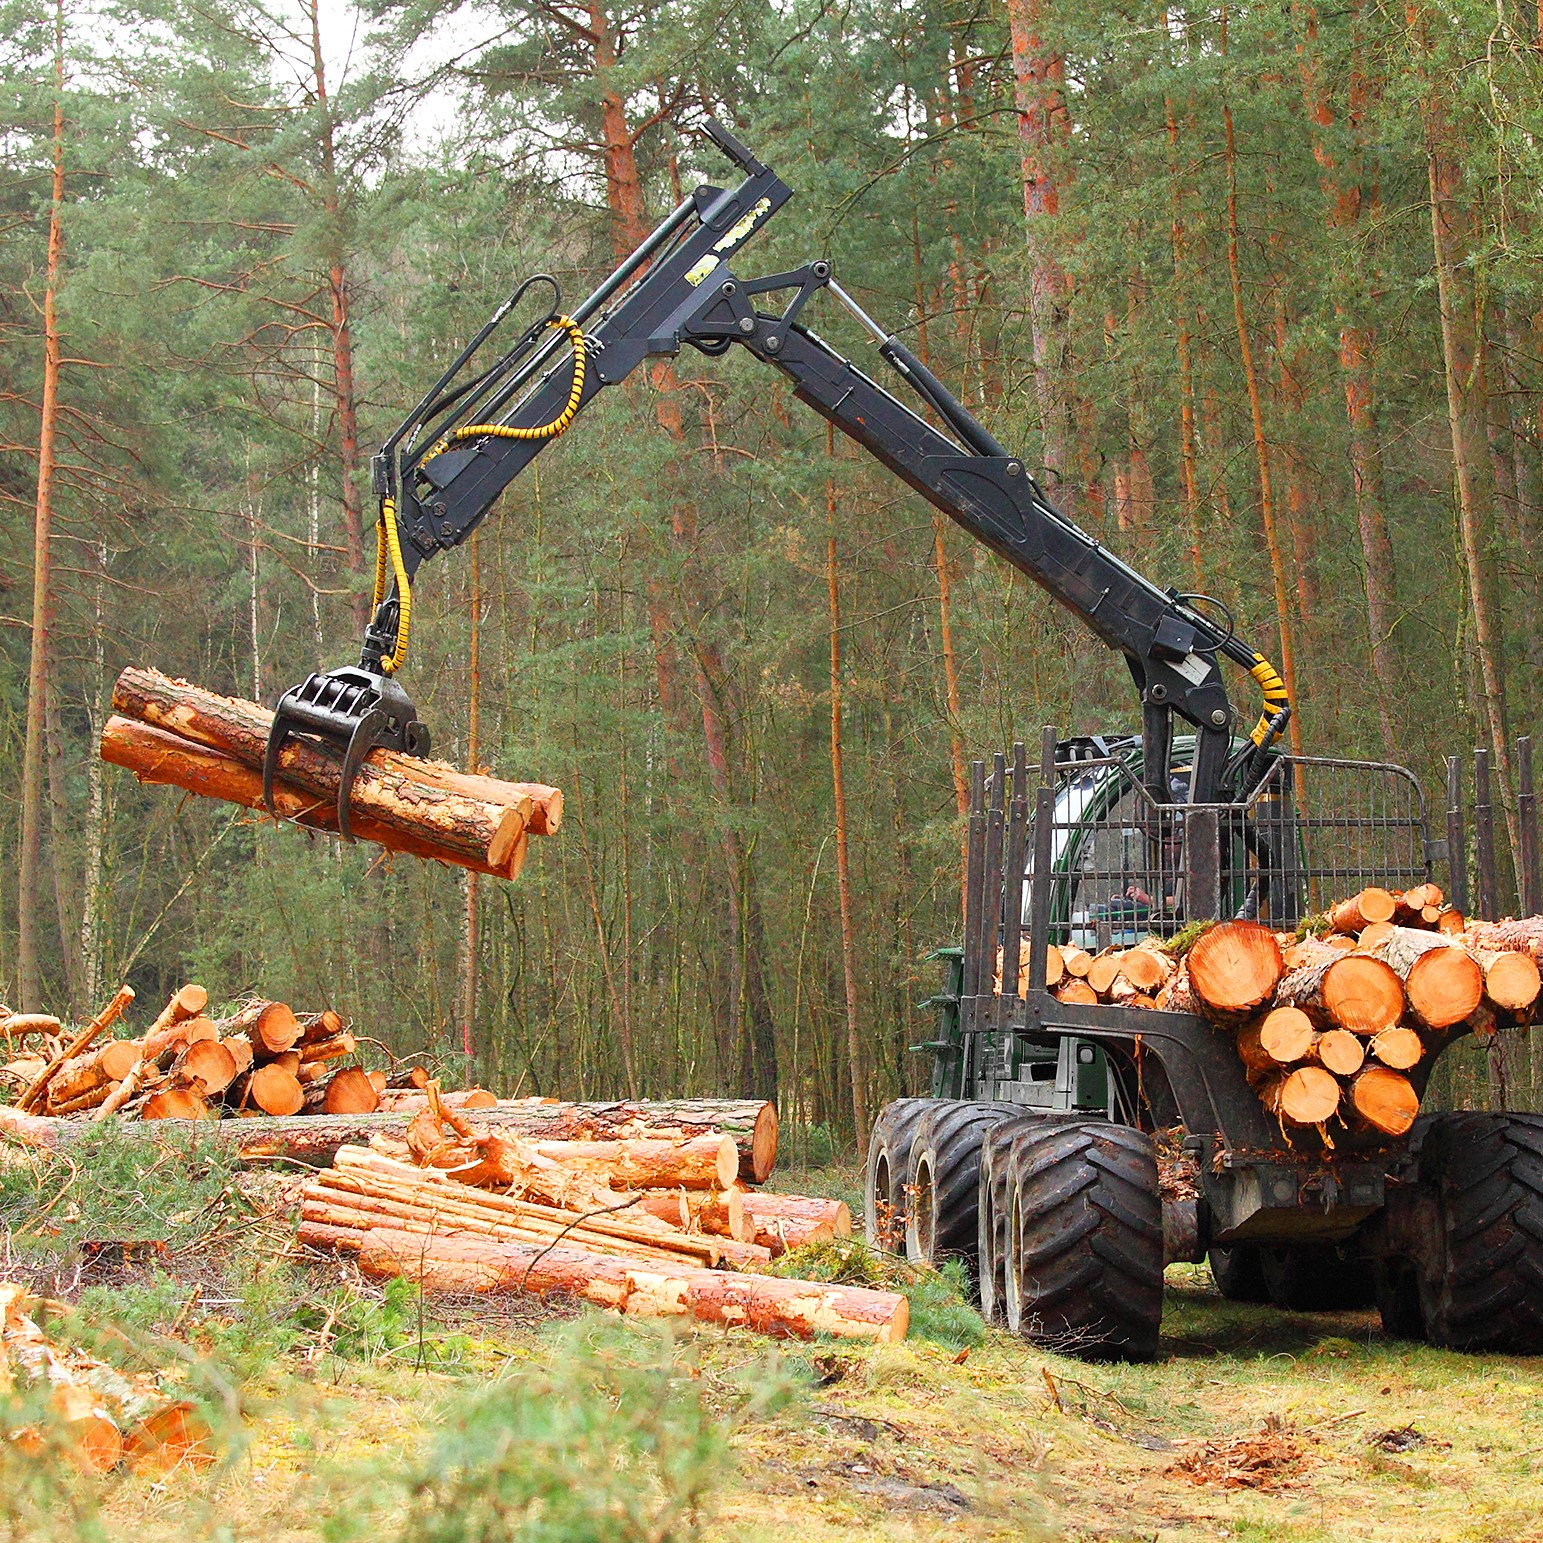 <span style="font-family: Calibri, sans-serif; font-size: 11pt;">The
U.S. Department of Agriculture (USDA) is providing up to $200 million to
provide relief to timber harvesting and timber hauling businesses that have
experienced losses due to COVID-19. </span>